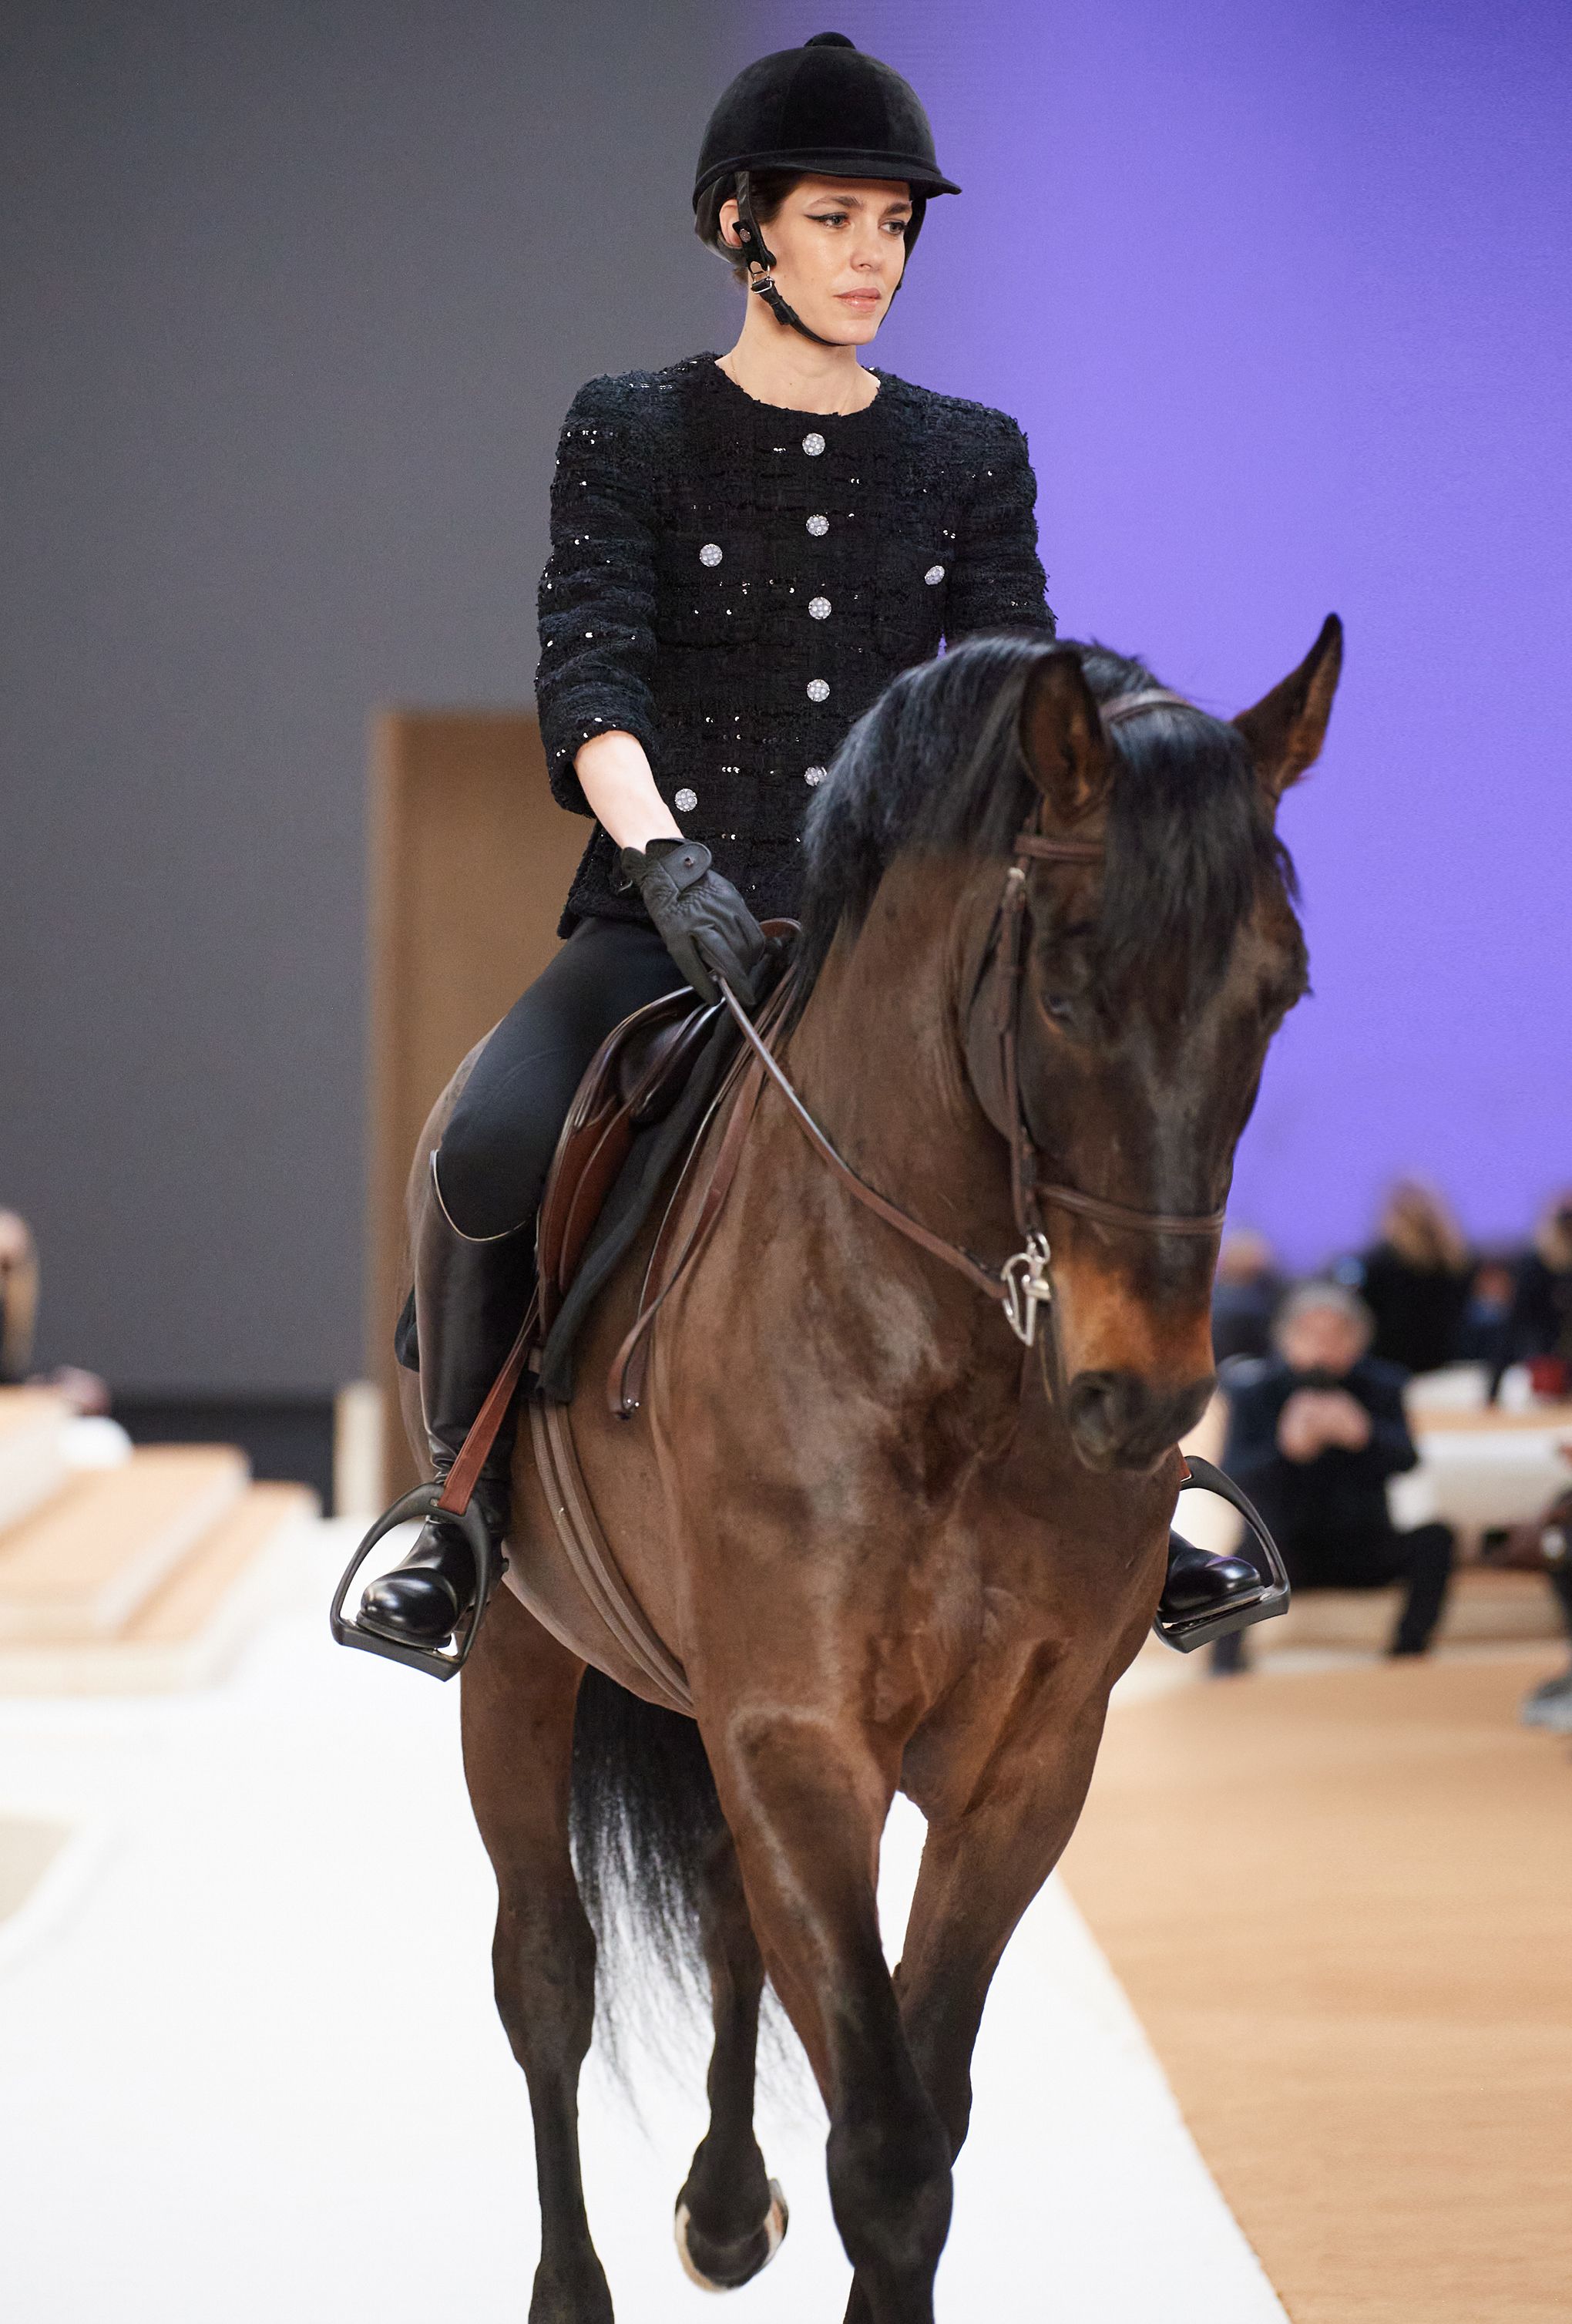 Horse riding's name is Chanel – Want it! Have it!